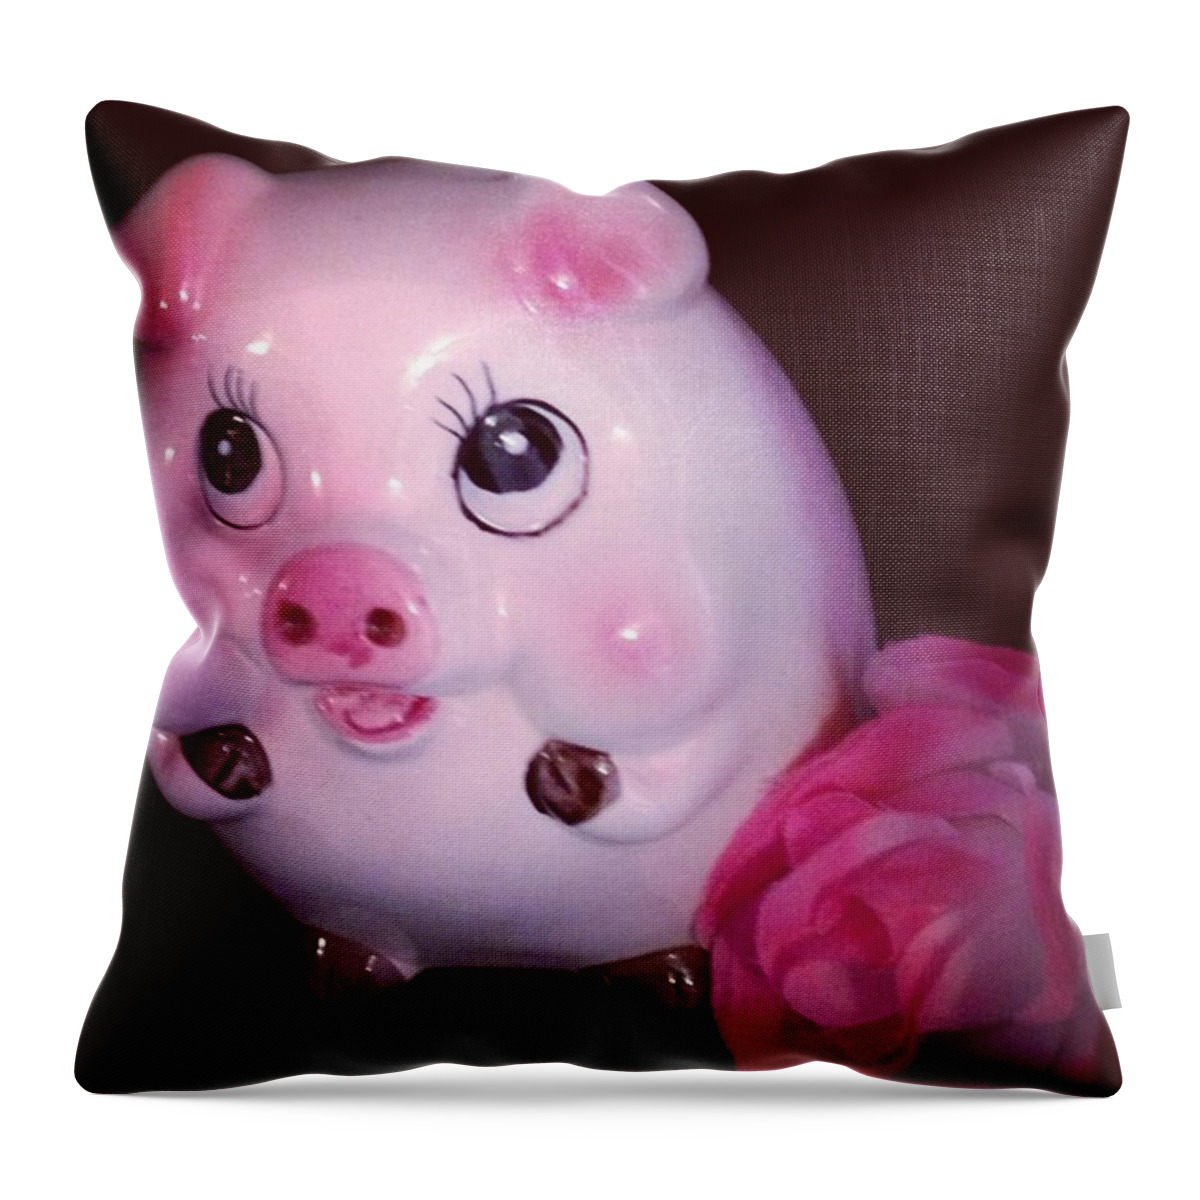 Pig Throw Pillow featuring the photograph My Piggy Bank by Rebeca Castellanos